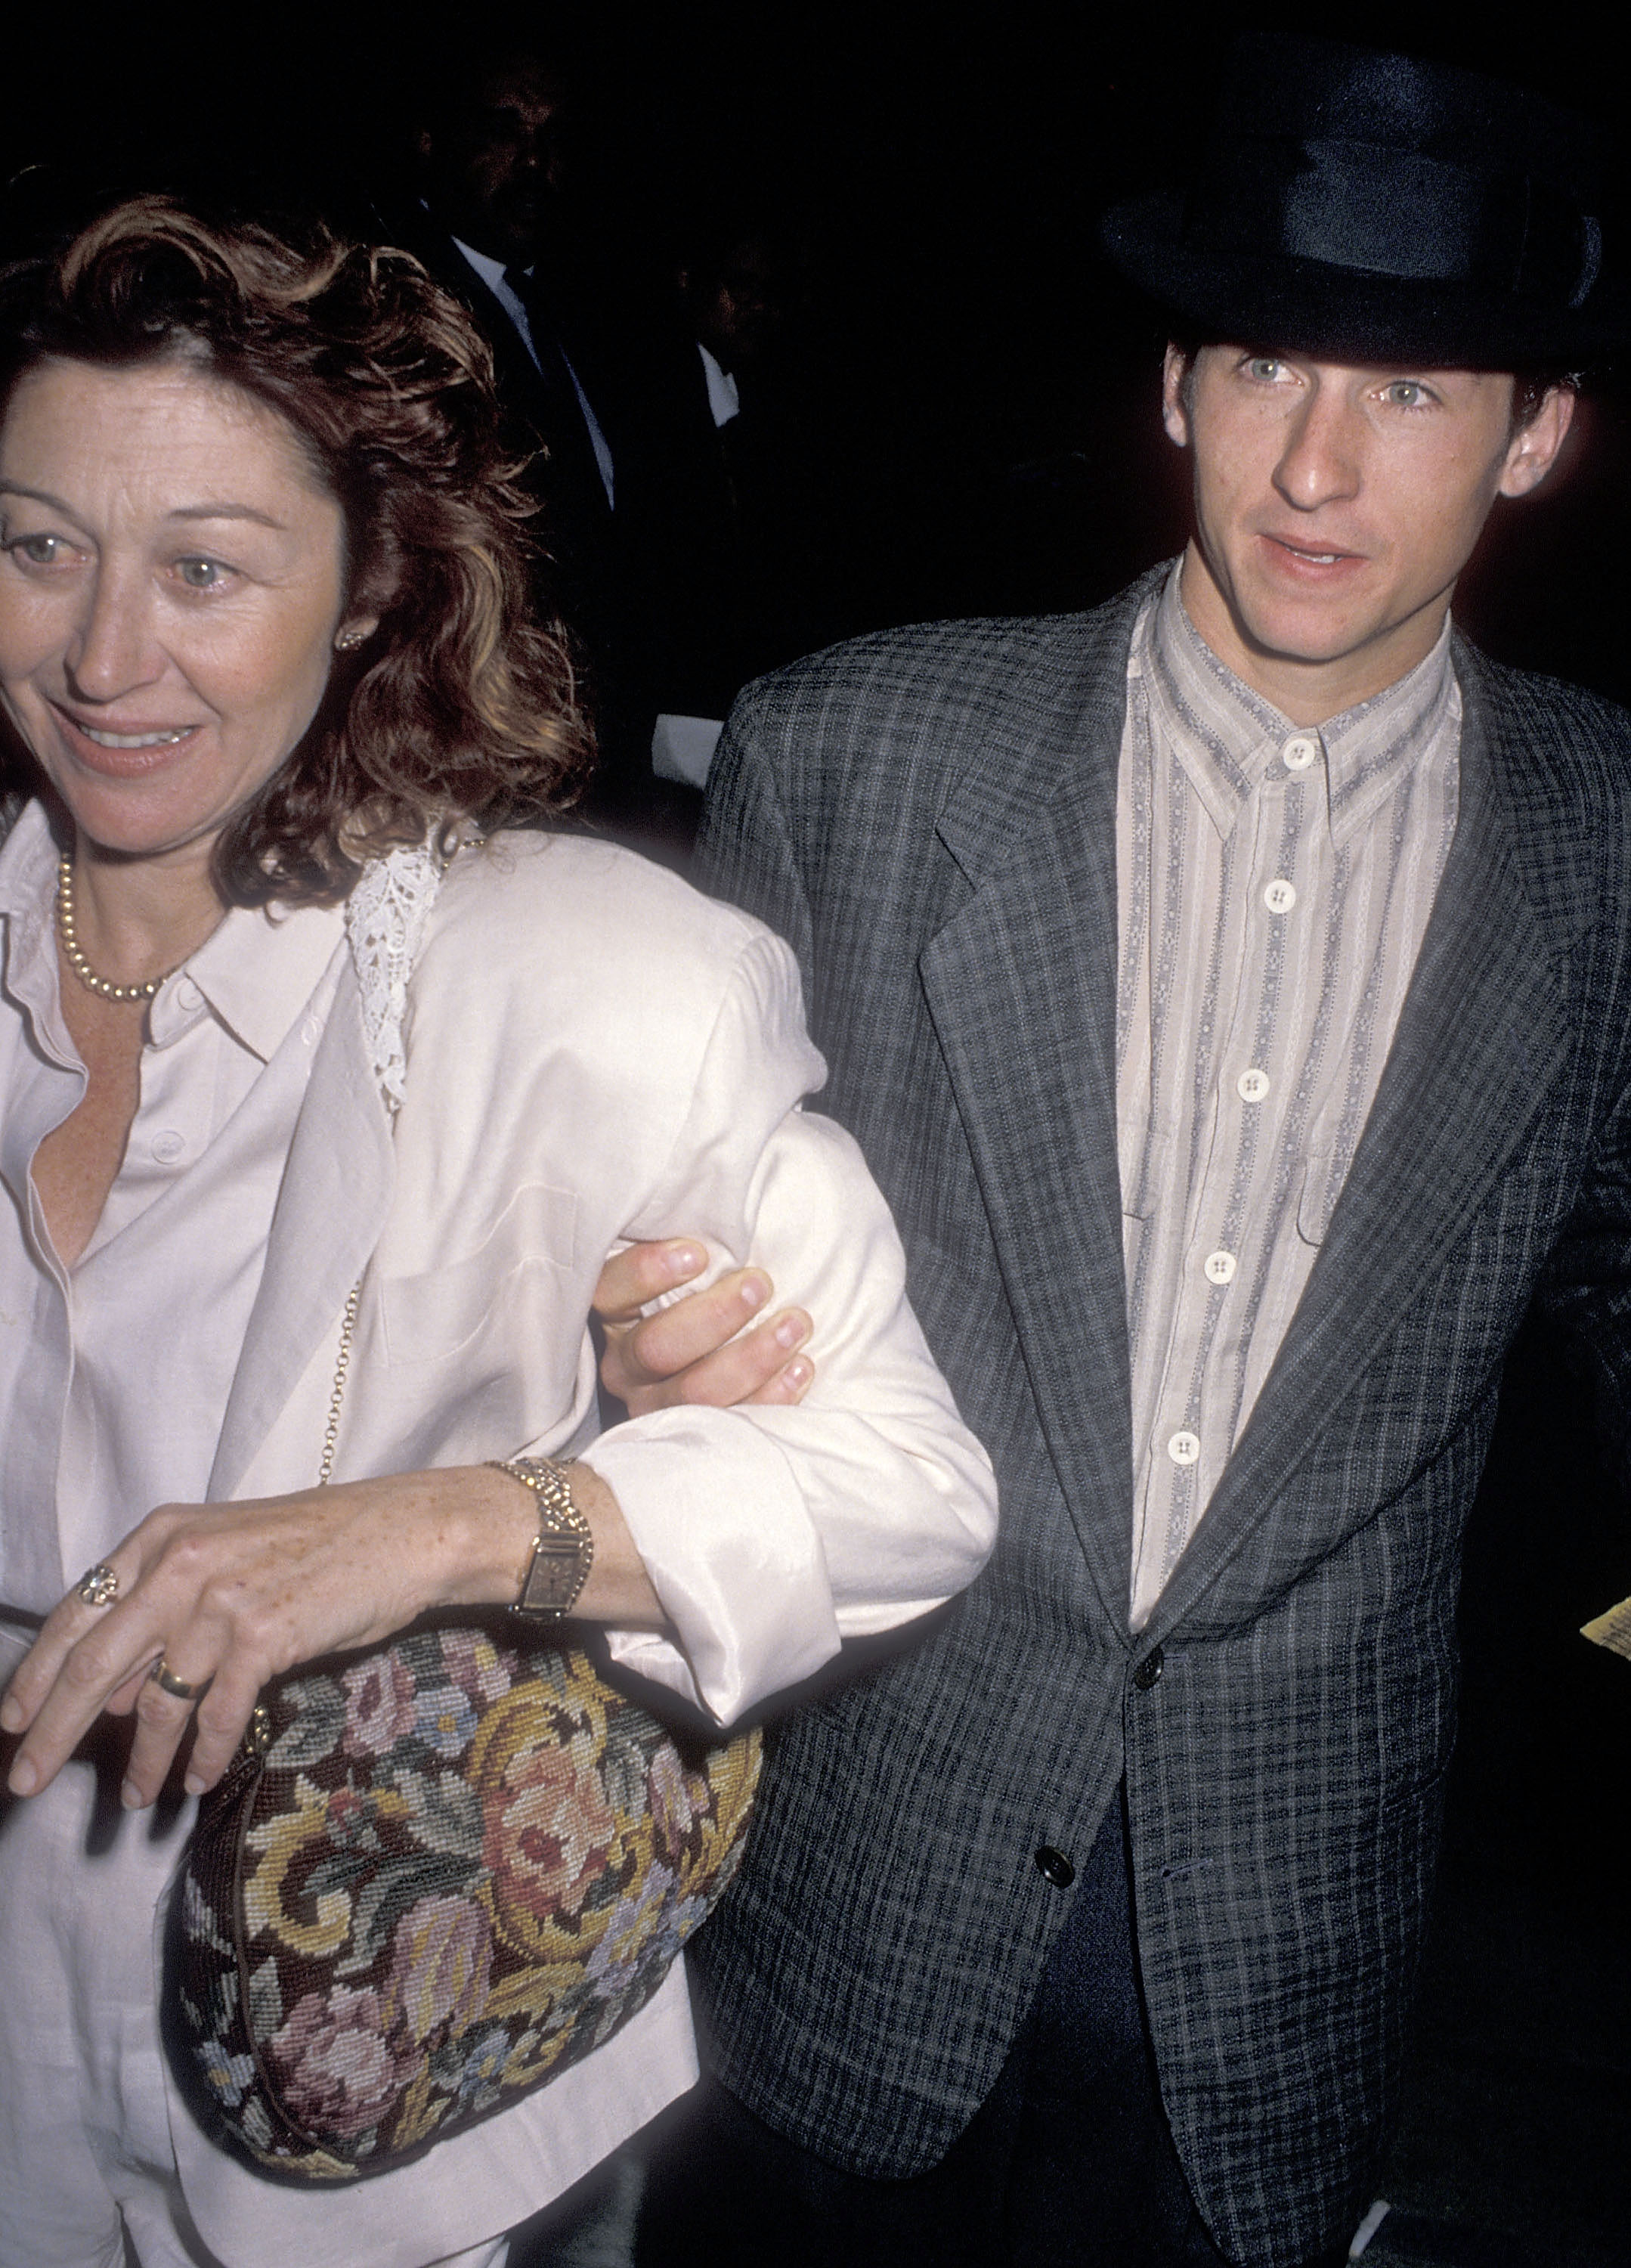 Patrick Dempsey and ex-wife Rocky Parker on February 23, 1990, at Pazzia Restaurant, in West Hollywood, California. | Source: Getty Images